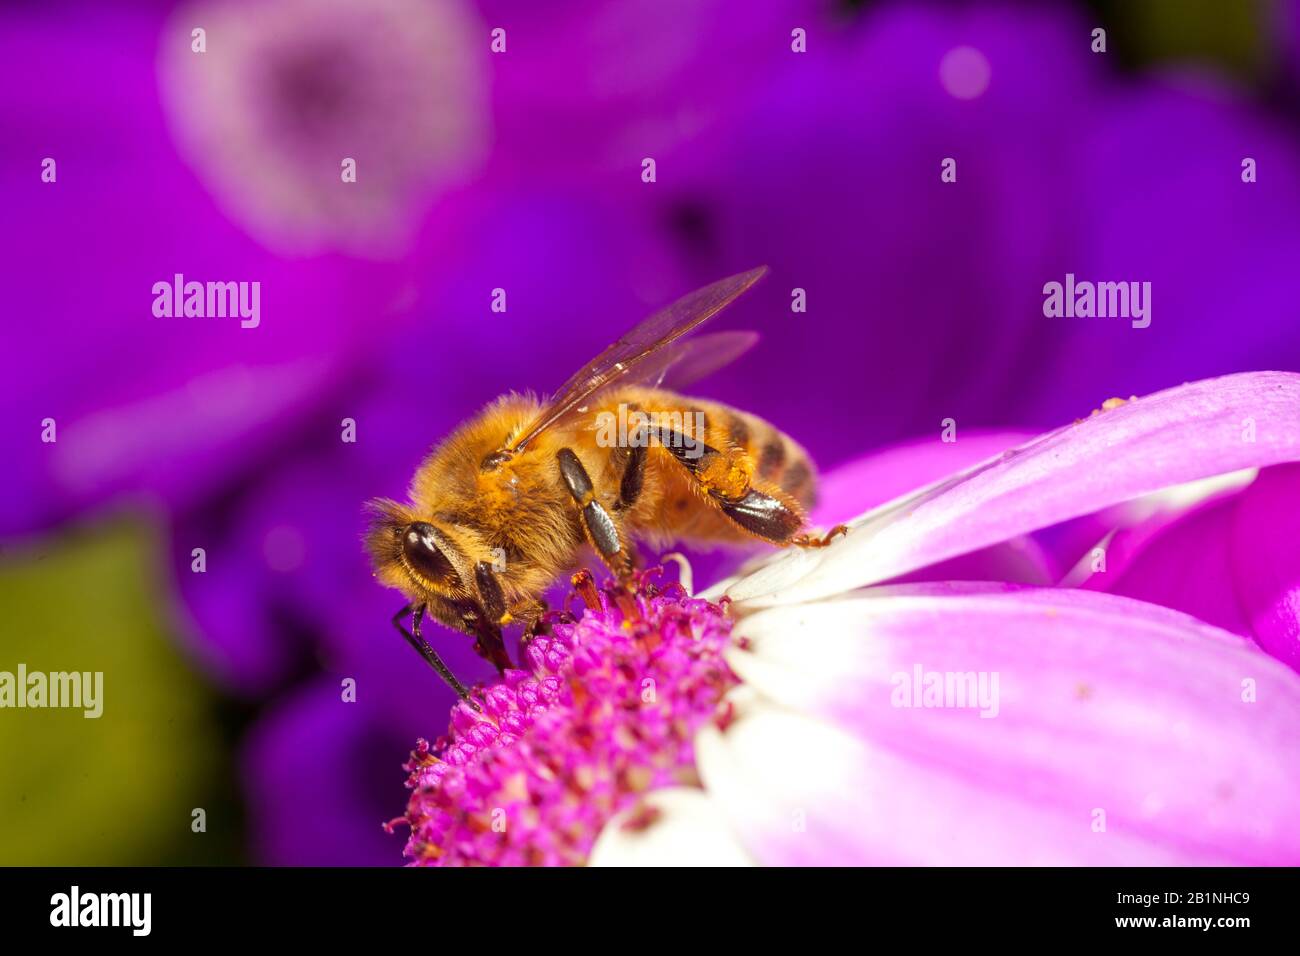 industrious insect the honey bee Stock Photo